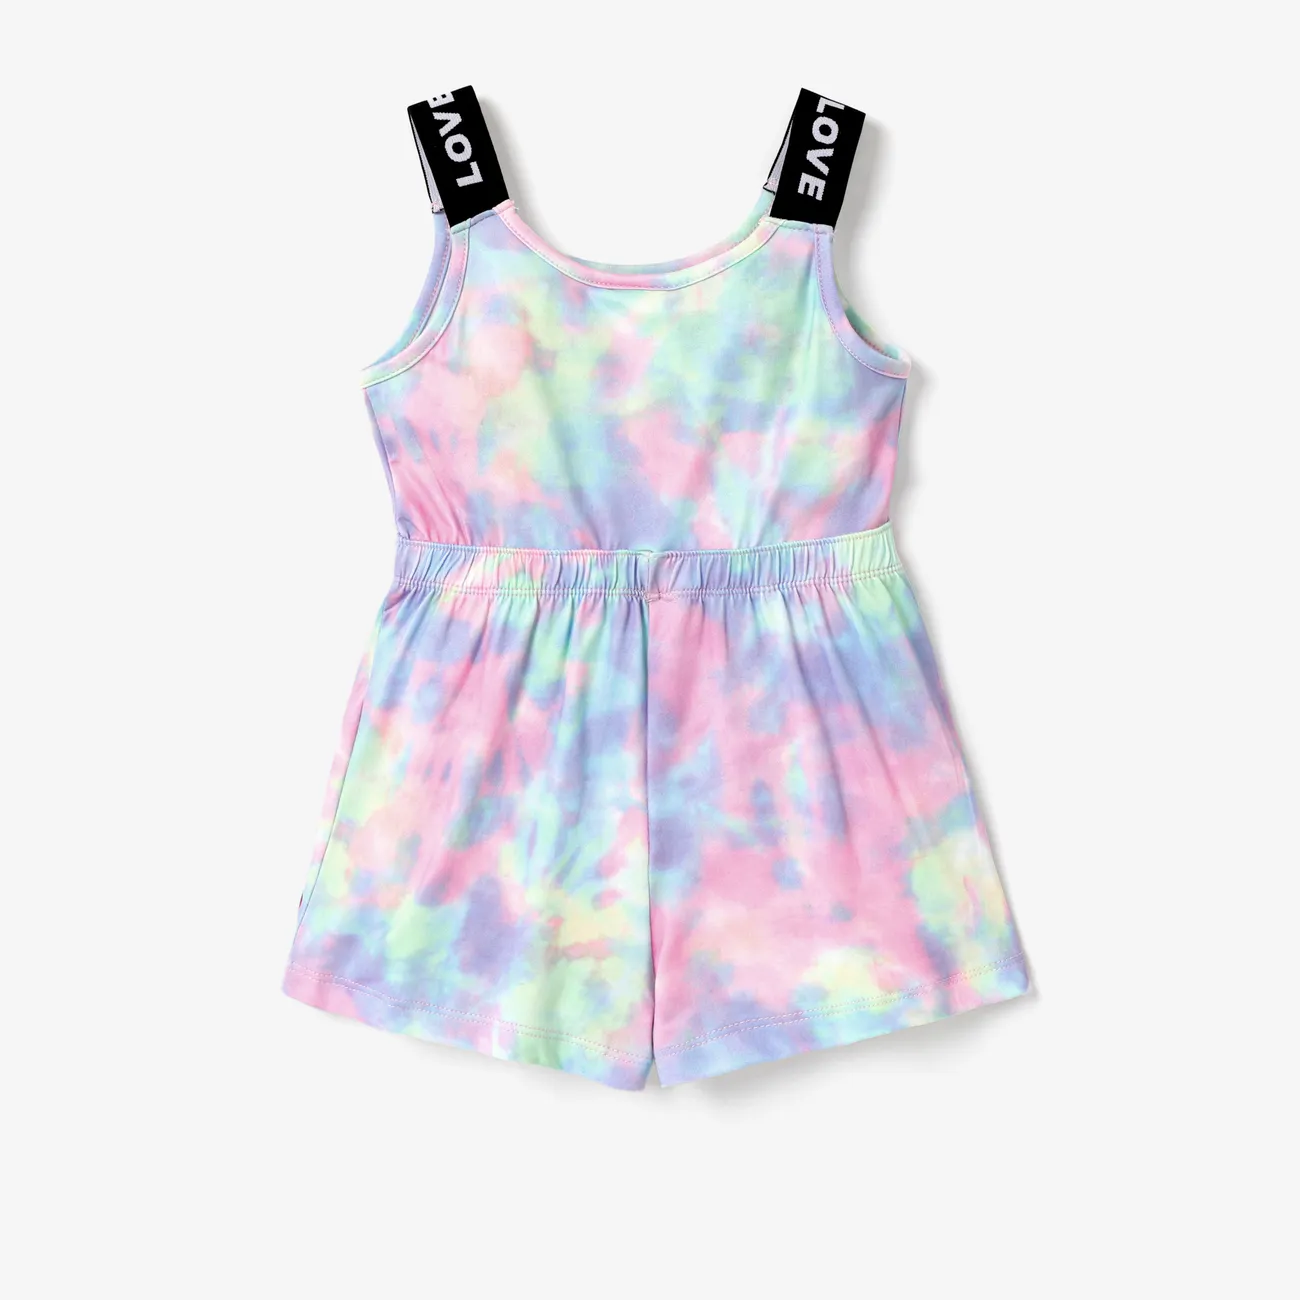 Barbie Toddler/Kid Girl Tyedyed Colorful Pattern with Classic Logo Print Jumpsuit Multi-color big image 1